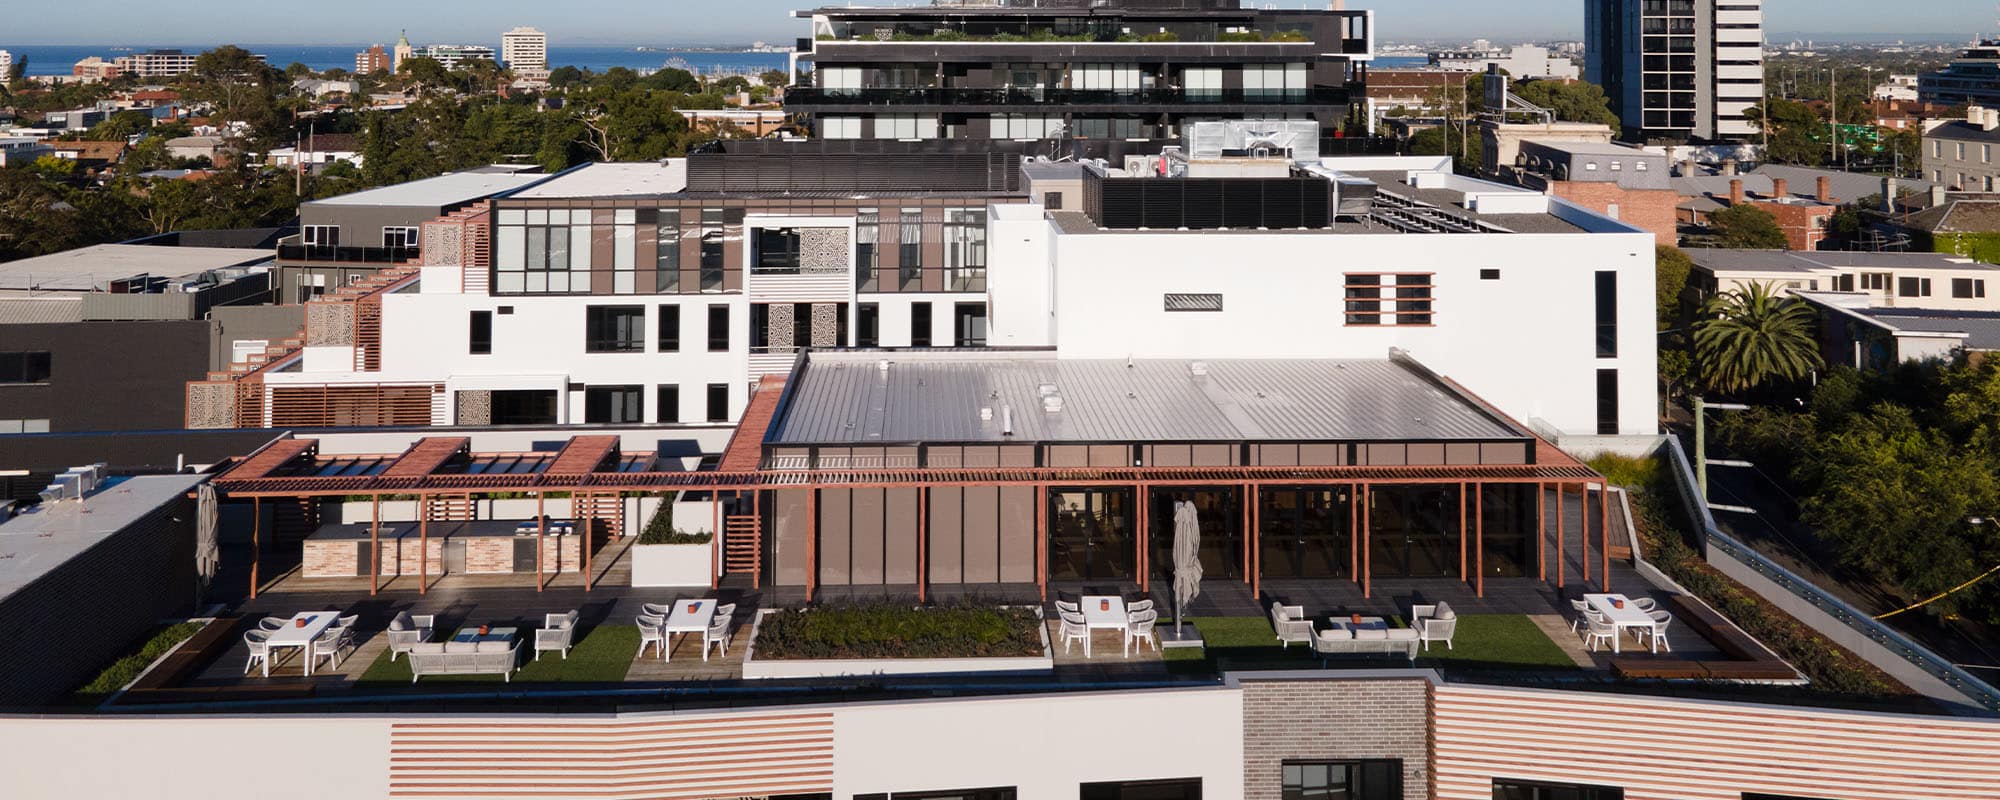 Drone view of europa building rooftop with bbq and seating